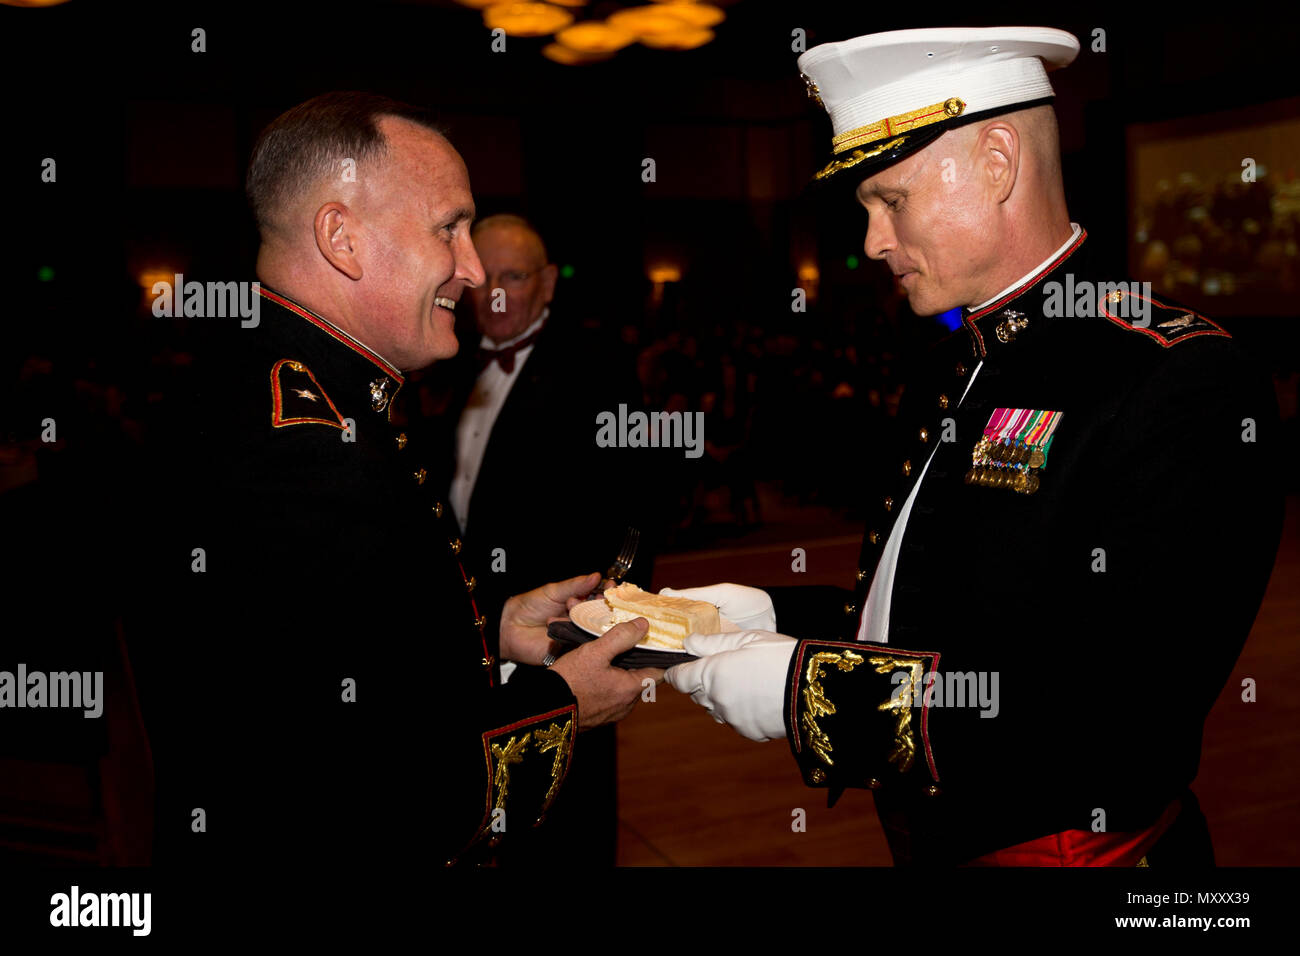 U.S. Marine Corps Brig. Gen. William M. Jurney, left, commanding general of Marine Corps Recruit Depot (MCRD) San Diego and  the Western Recruiting Region (WRR), passes a piece of cake to Col. Mark M. Tull, chief of staff of MCRD San Diego and the WRR, at the Hilton San Diego Bayfront hotel, San Diego, Calif., Nov. 12, 2016. Tull was given a piece of cake as the oldest active duty Marine during the 241st Marine Corps birthday celebration. (U.S. Marine Corps photo by Lance Cpl. Robert G. Gavaldon) Stock Photo